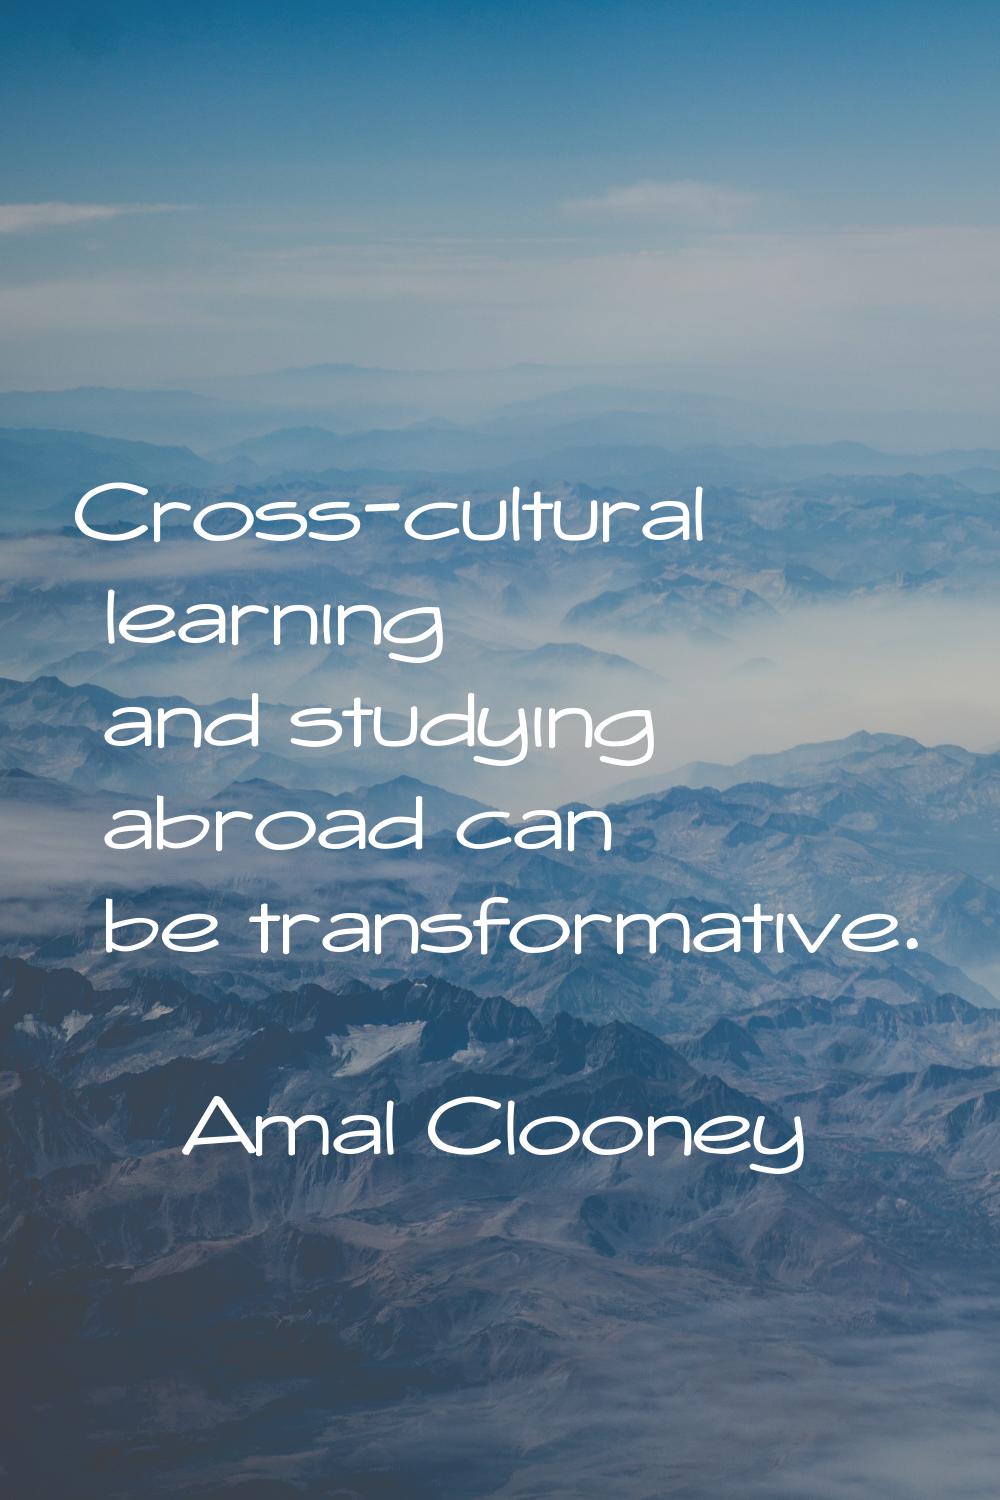 Cross-cultural learning and studying abroad can be transformative.